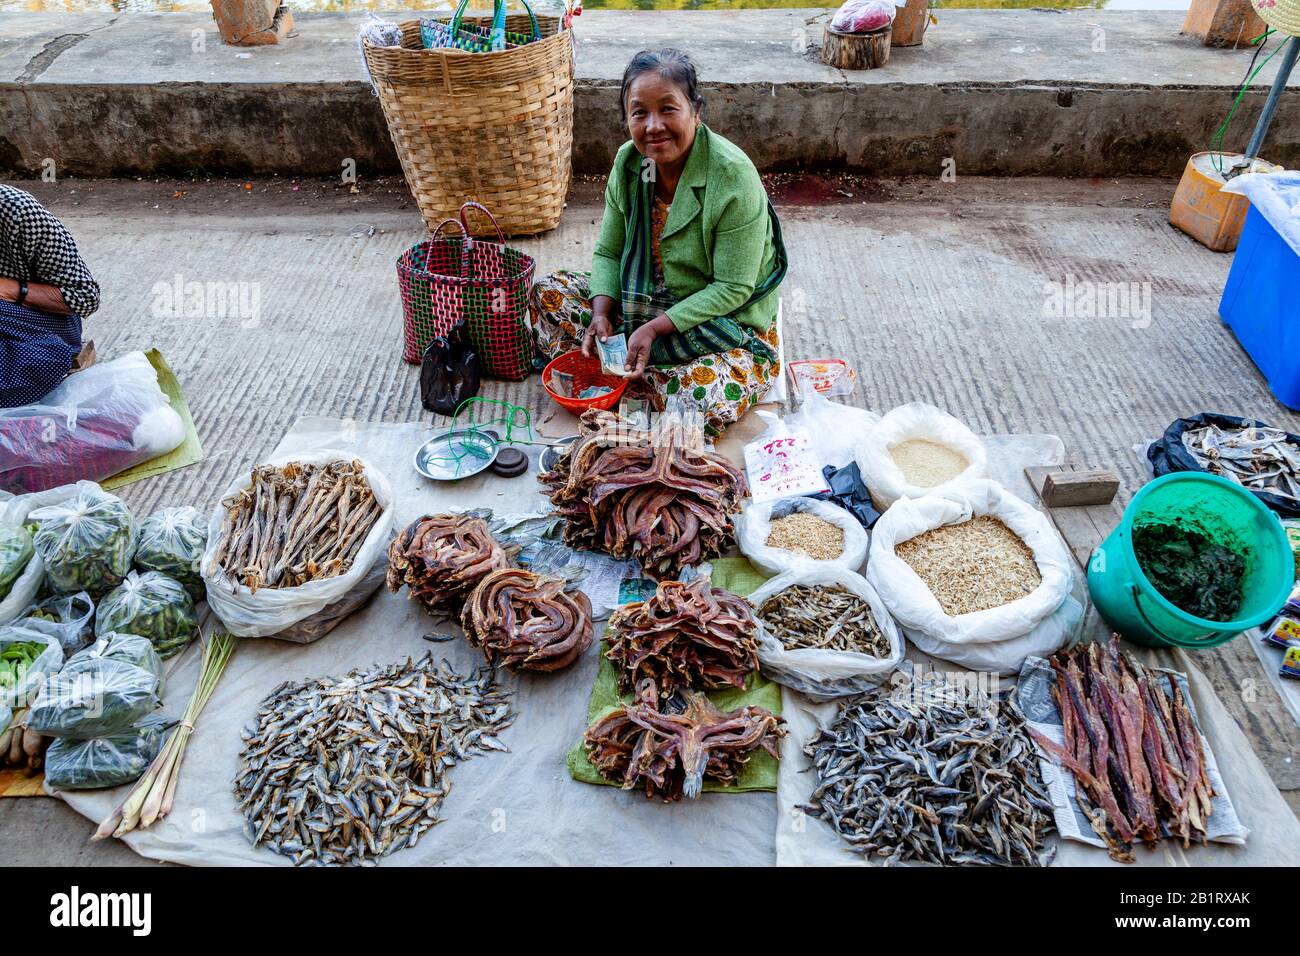 A Local Woman Sells Dried Fish In The Central Market, Loikaw, Kayah State, Myanmar. Stock Photo